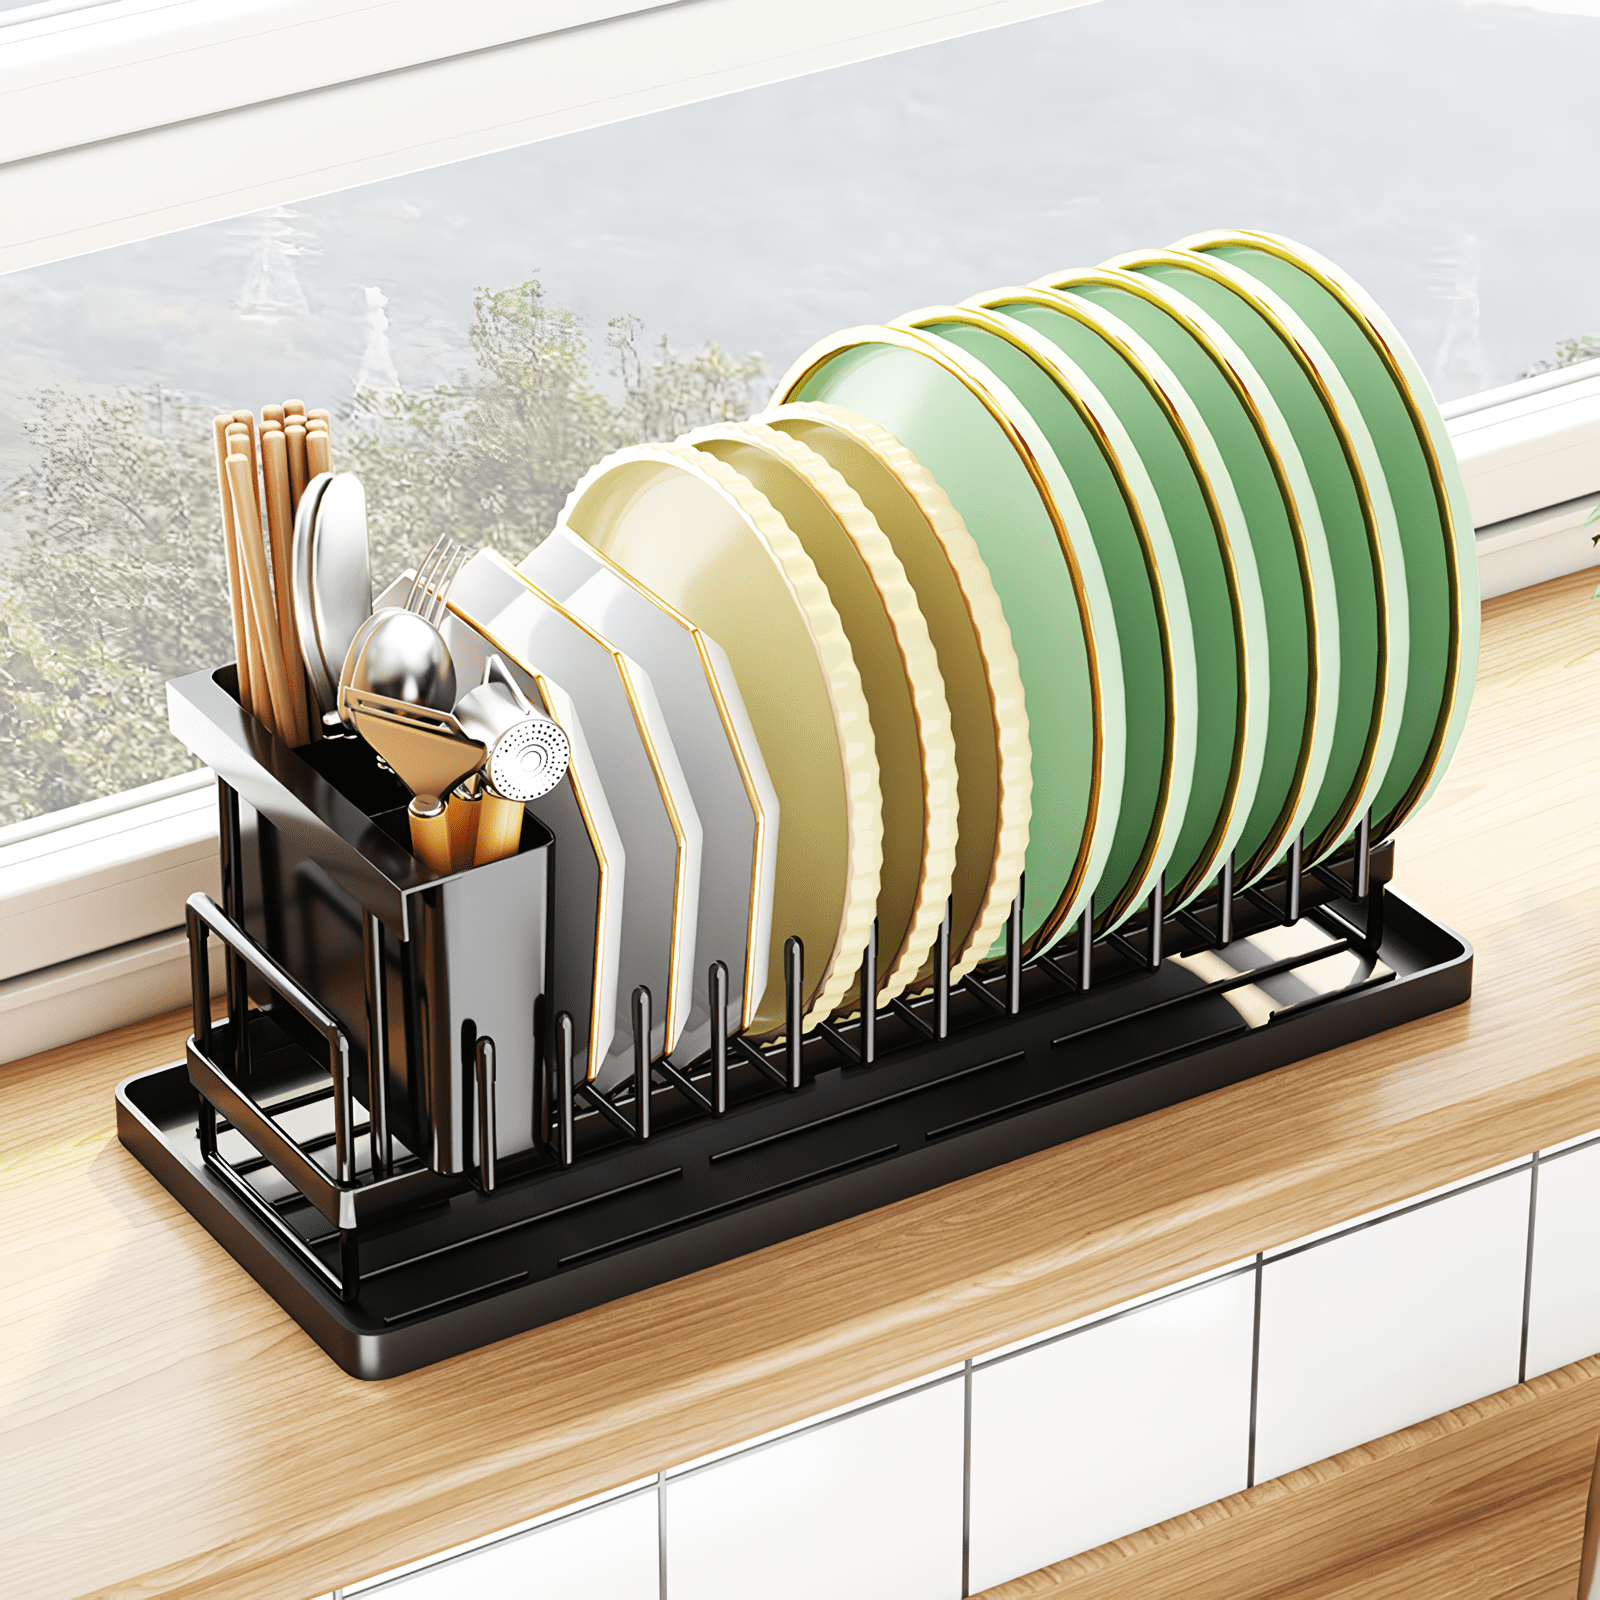  TQVAI Stainless Steel Dish Drying Rack with Drainboard, Rod and  Sponge Hook Holder, Hanging Dish Drainer, Over The Sink Dish Rack - Silver:  Home & Kitchen